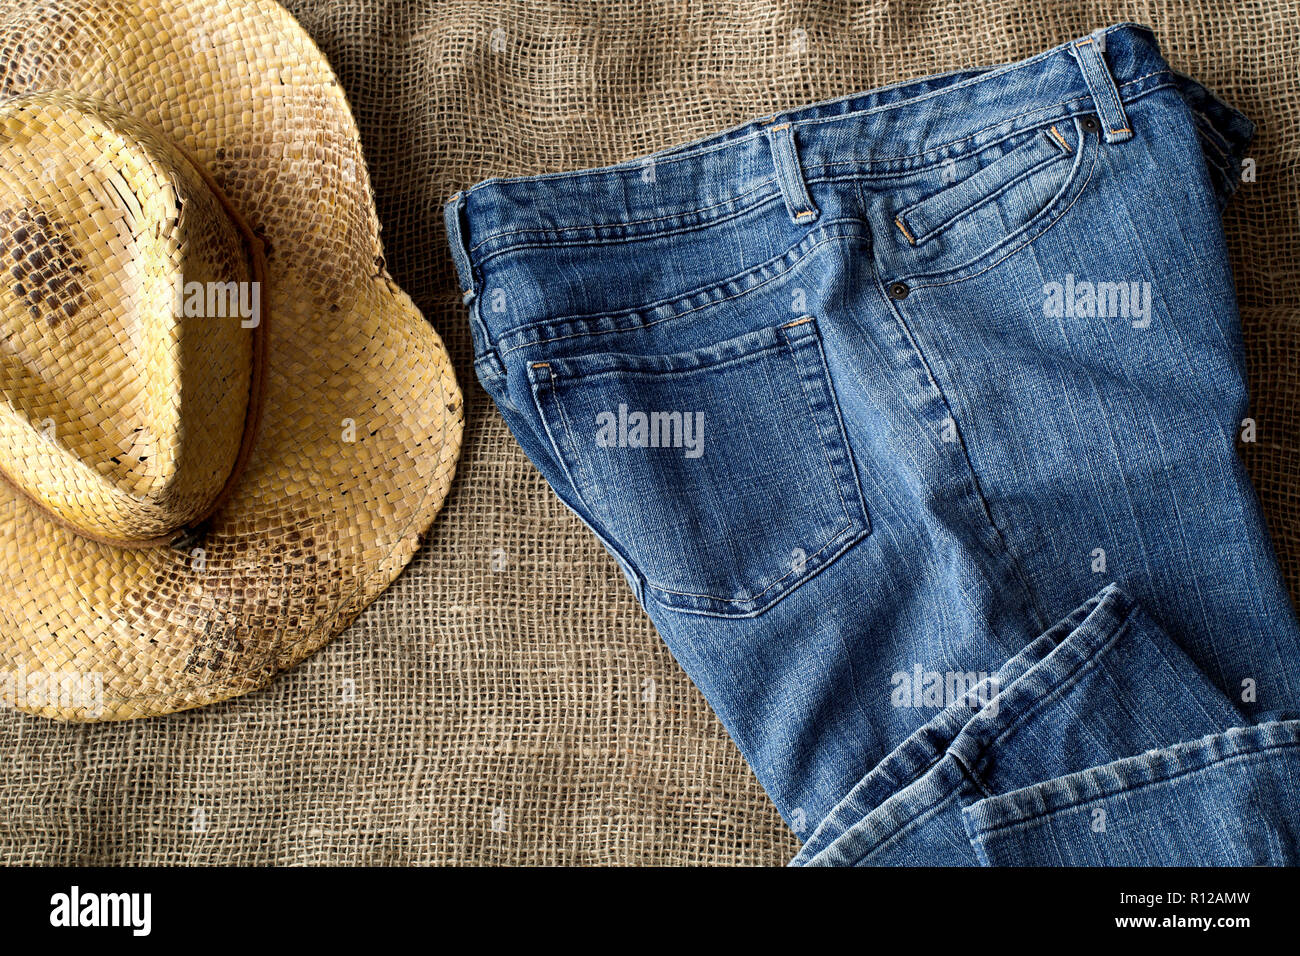 Blue jeans and country style straw hat on burlap. Top down view. Stock Photo